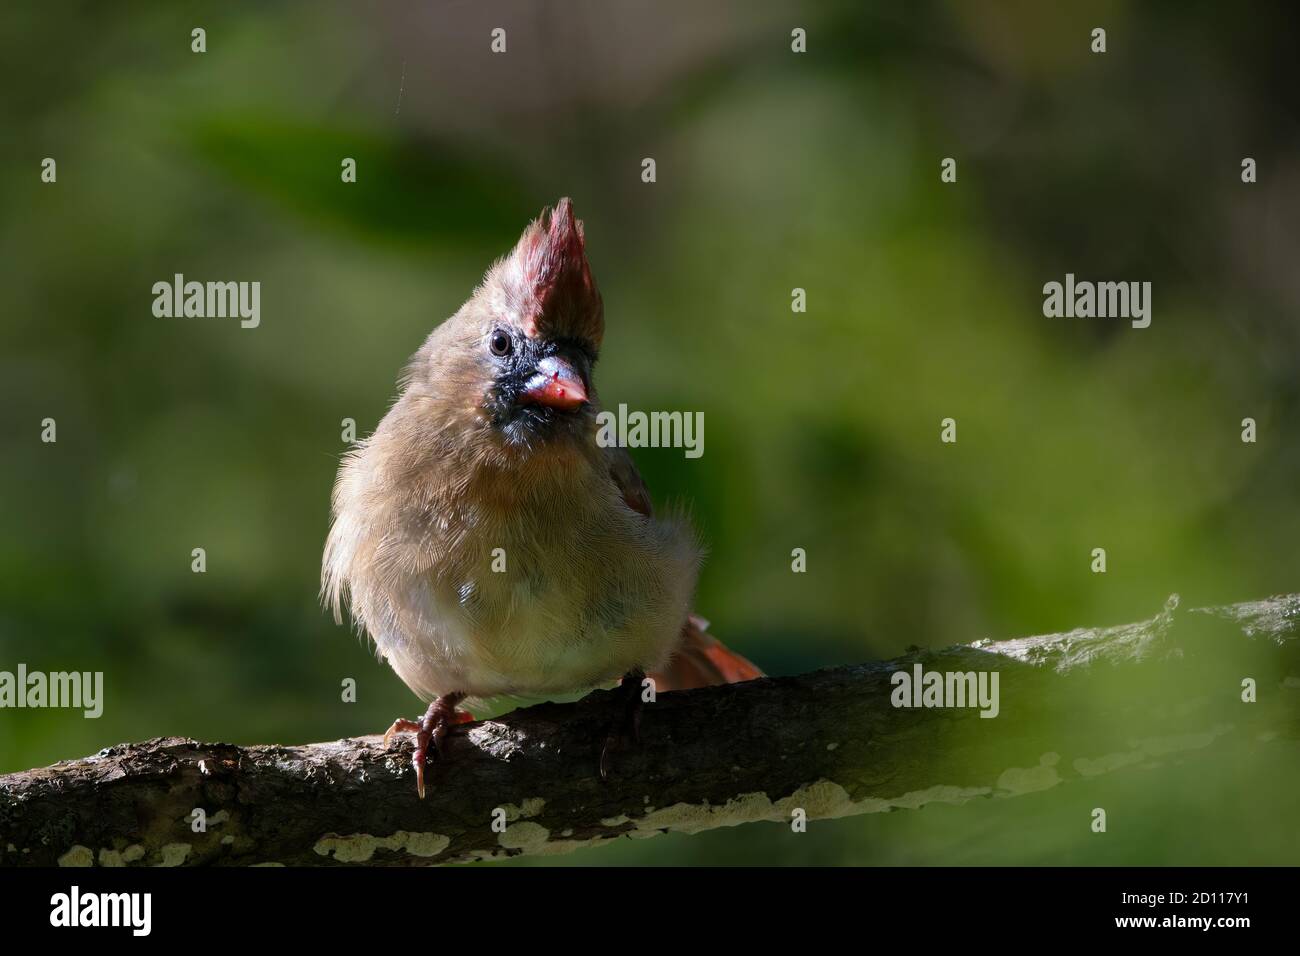 A female Northern Cardinal (Cardinalis cardinalis) This mid-sized songbird is commonly found in woodlands and gardens in eastern North America. Stock Photo